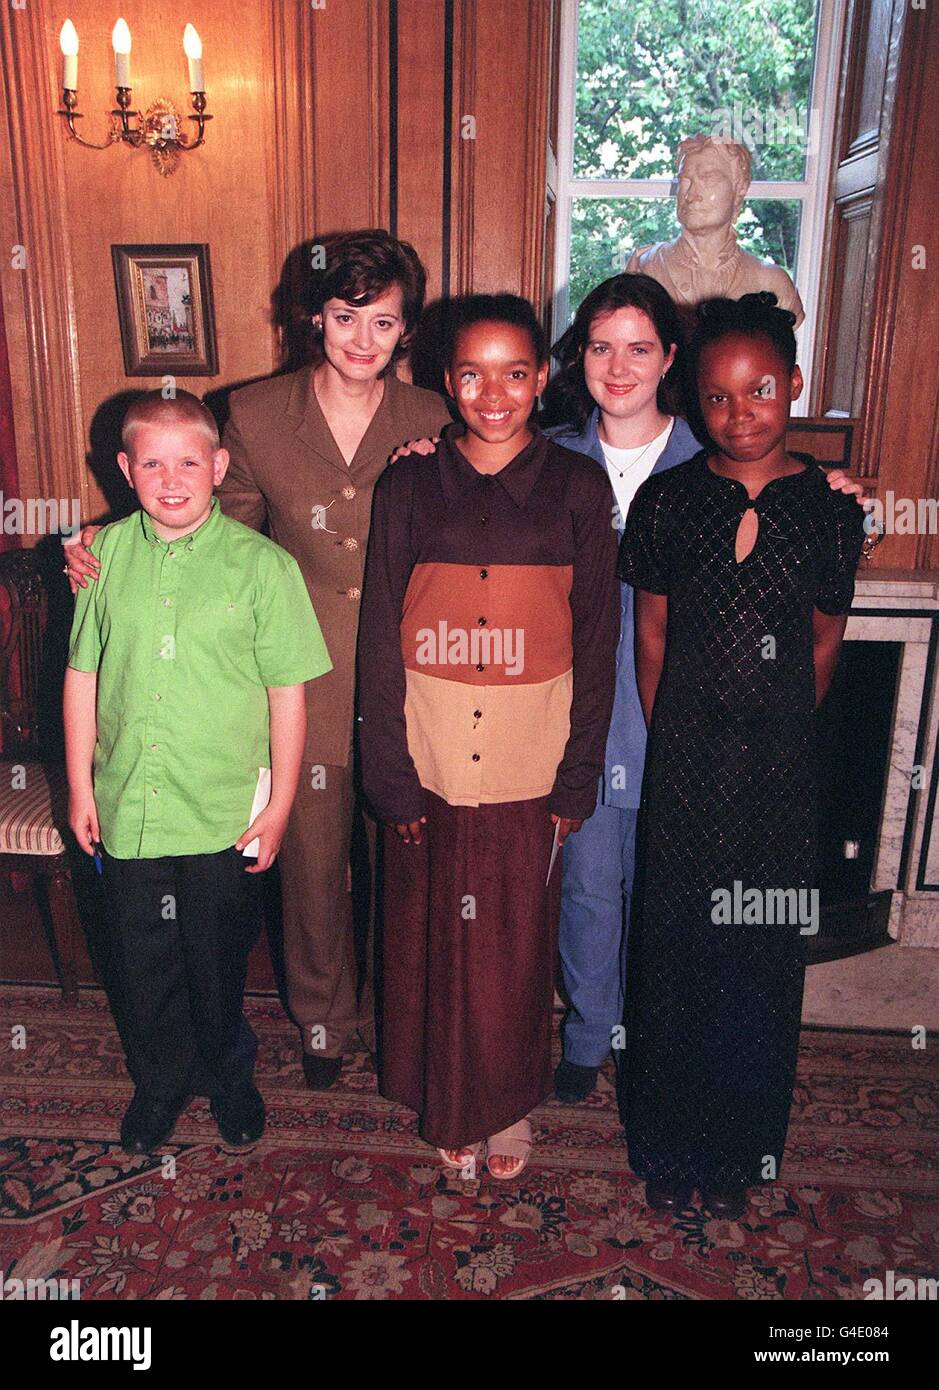 Prime Minsister's wife Cherie Blair with MP Claire Ward and children (from left) Billy Grace, Tiffany Andrews and Aiseosa Okuonghae during their visit to 10 Downing Street this evening (Thursday) to have tea with Mrs Blair. Photo by John Stillwell/PA. Stock Photo